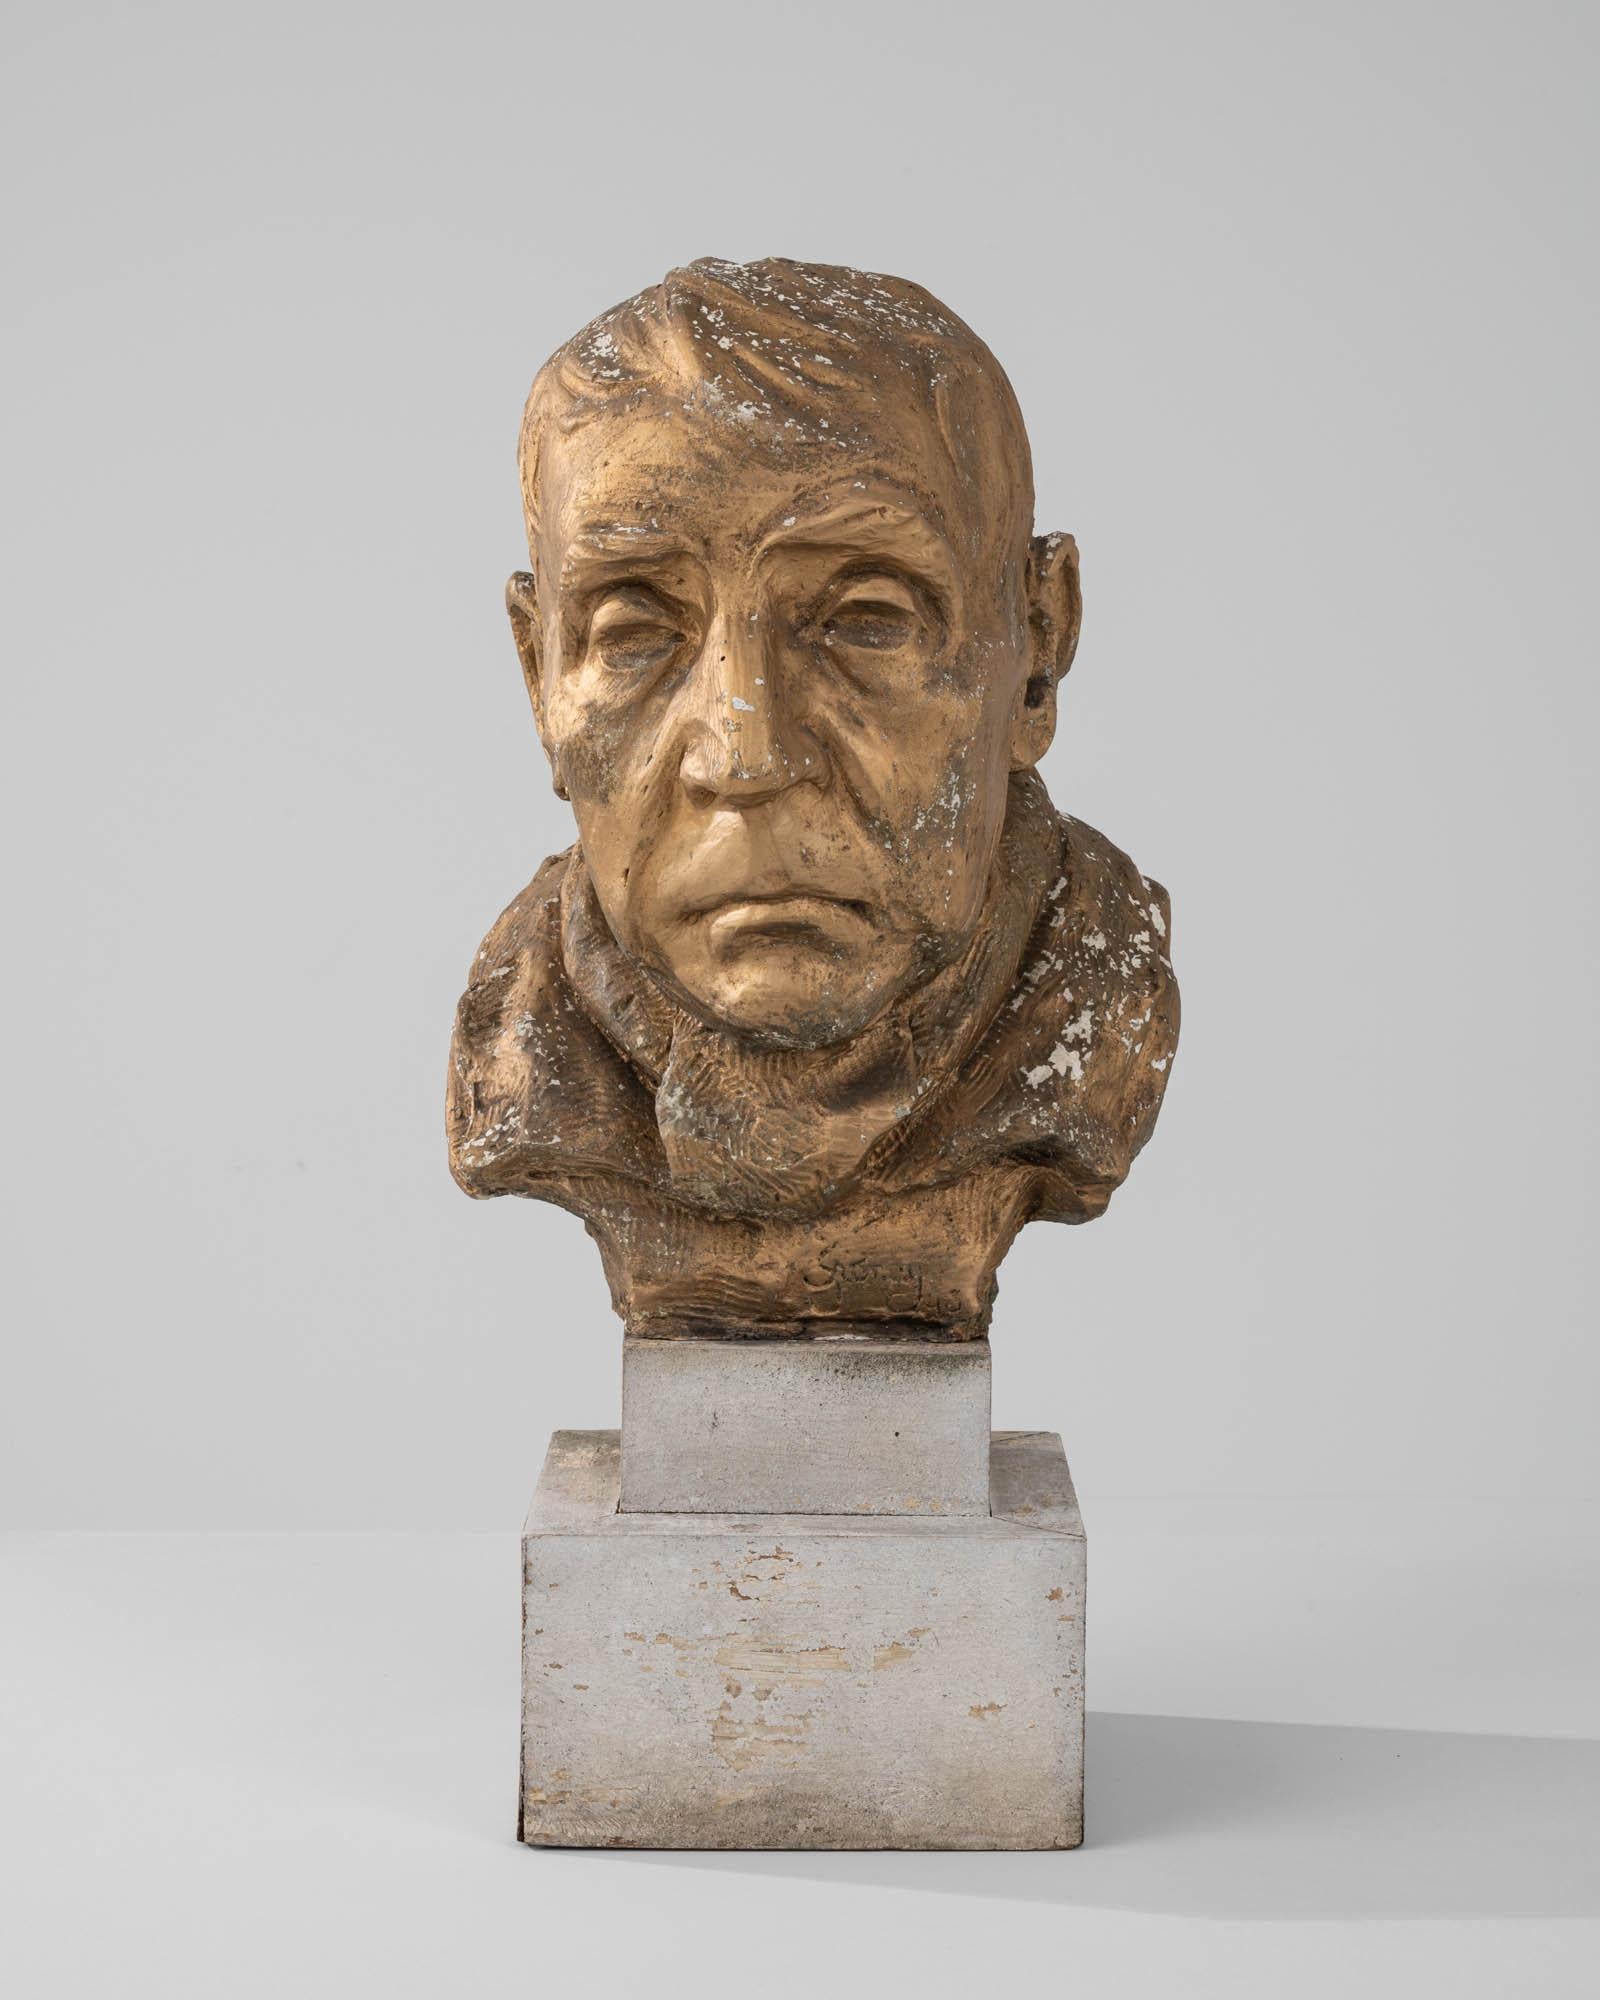 Sculpted in 20th-century Europe, this plaster bust portrays a senior man with meticulously crafted facial features—the arch of his bushy eyebrows, the downturned corners of his mouth, and deep wrinkles that trace the contours of his face—all